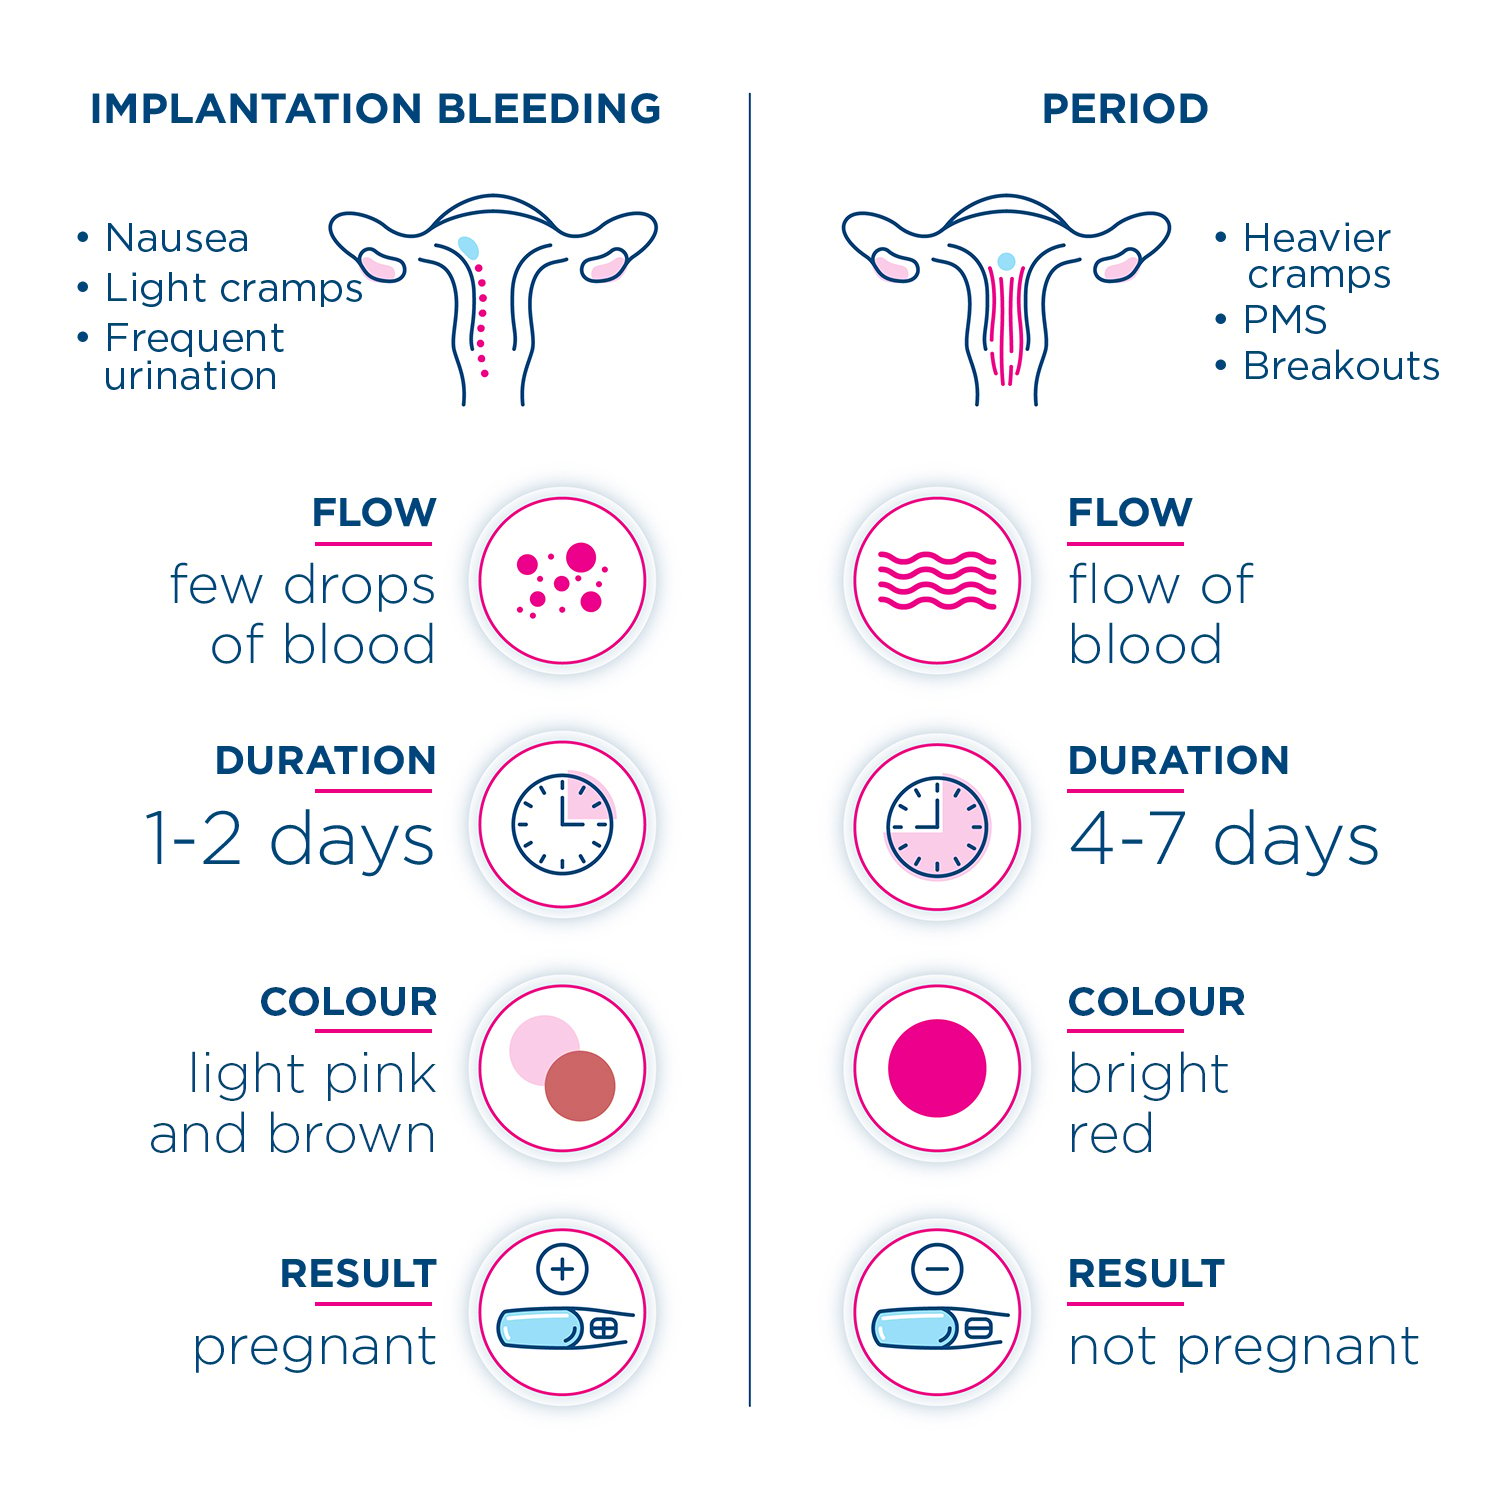 Infographic comparing the signs and symptoms to tell the difference of implantation bleeding and your period